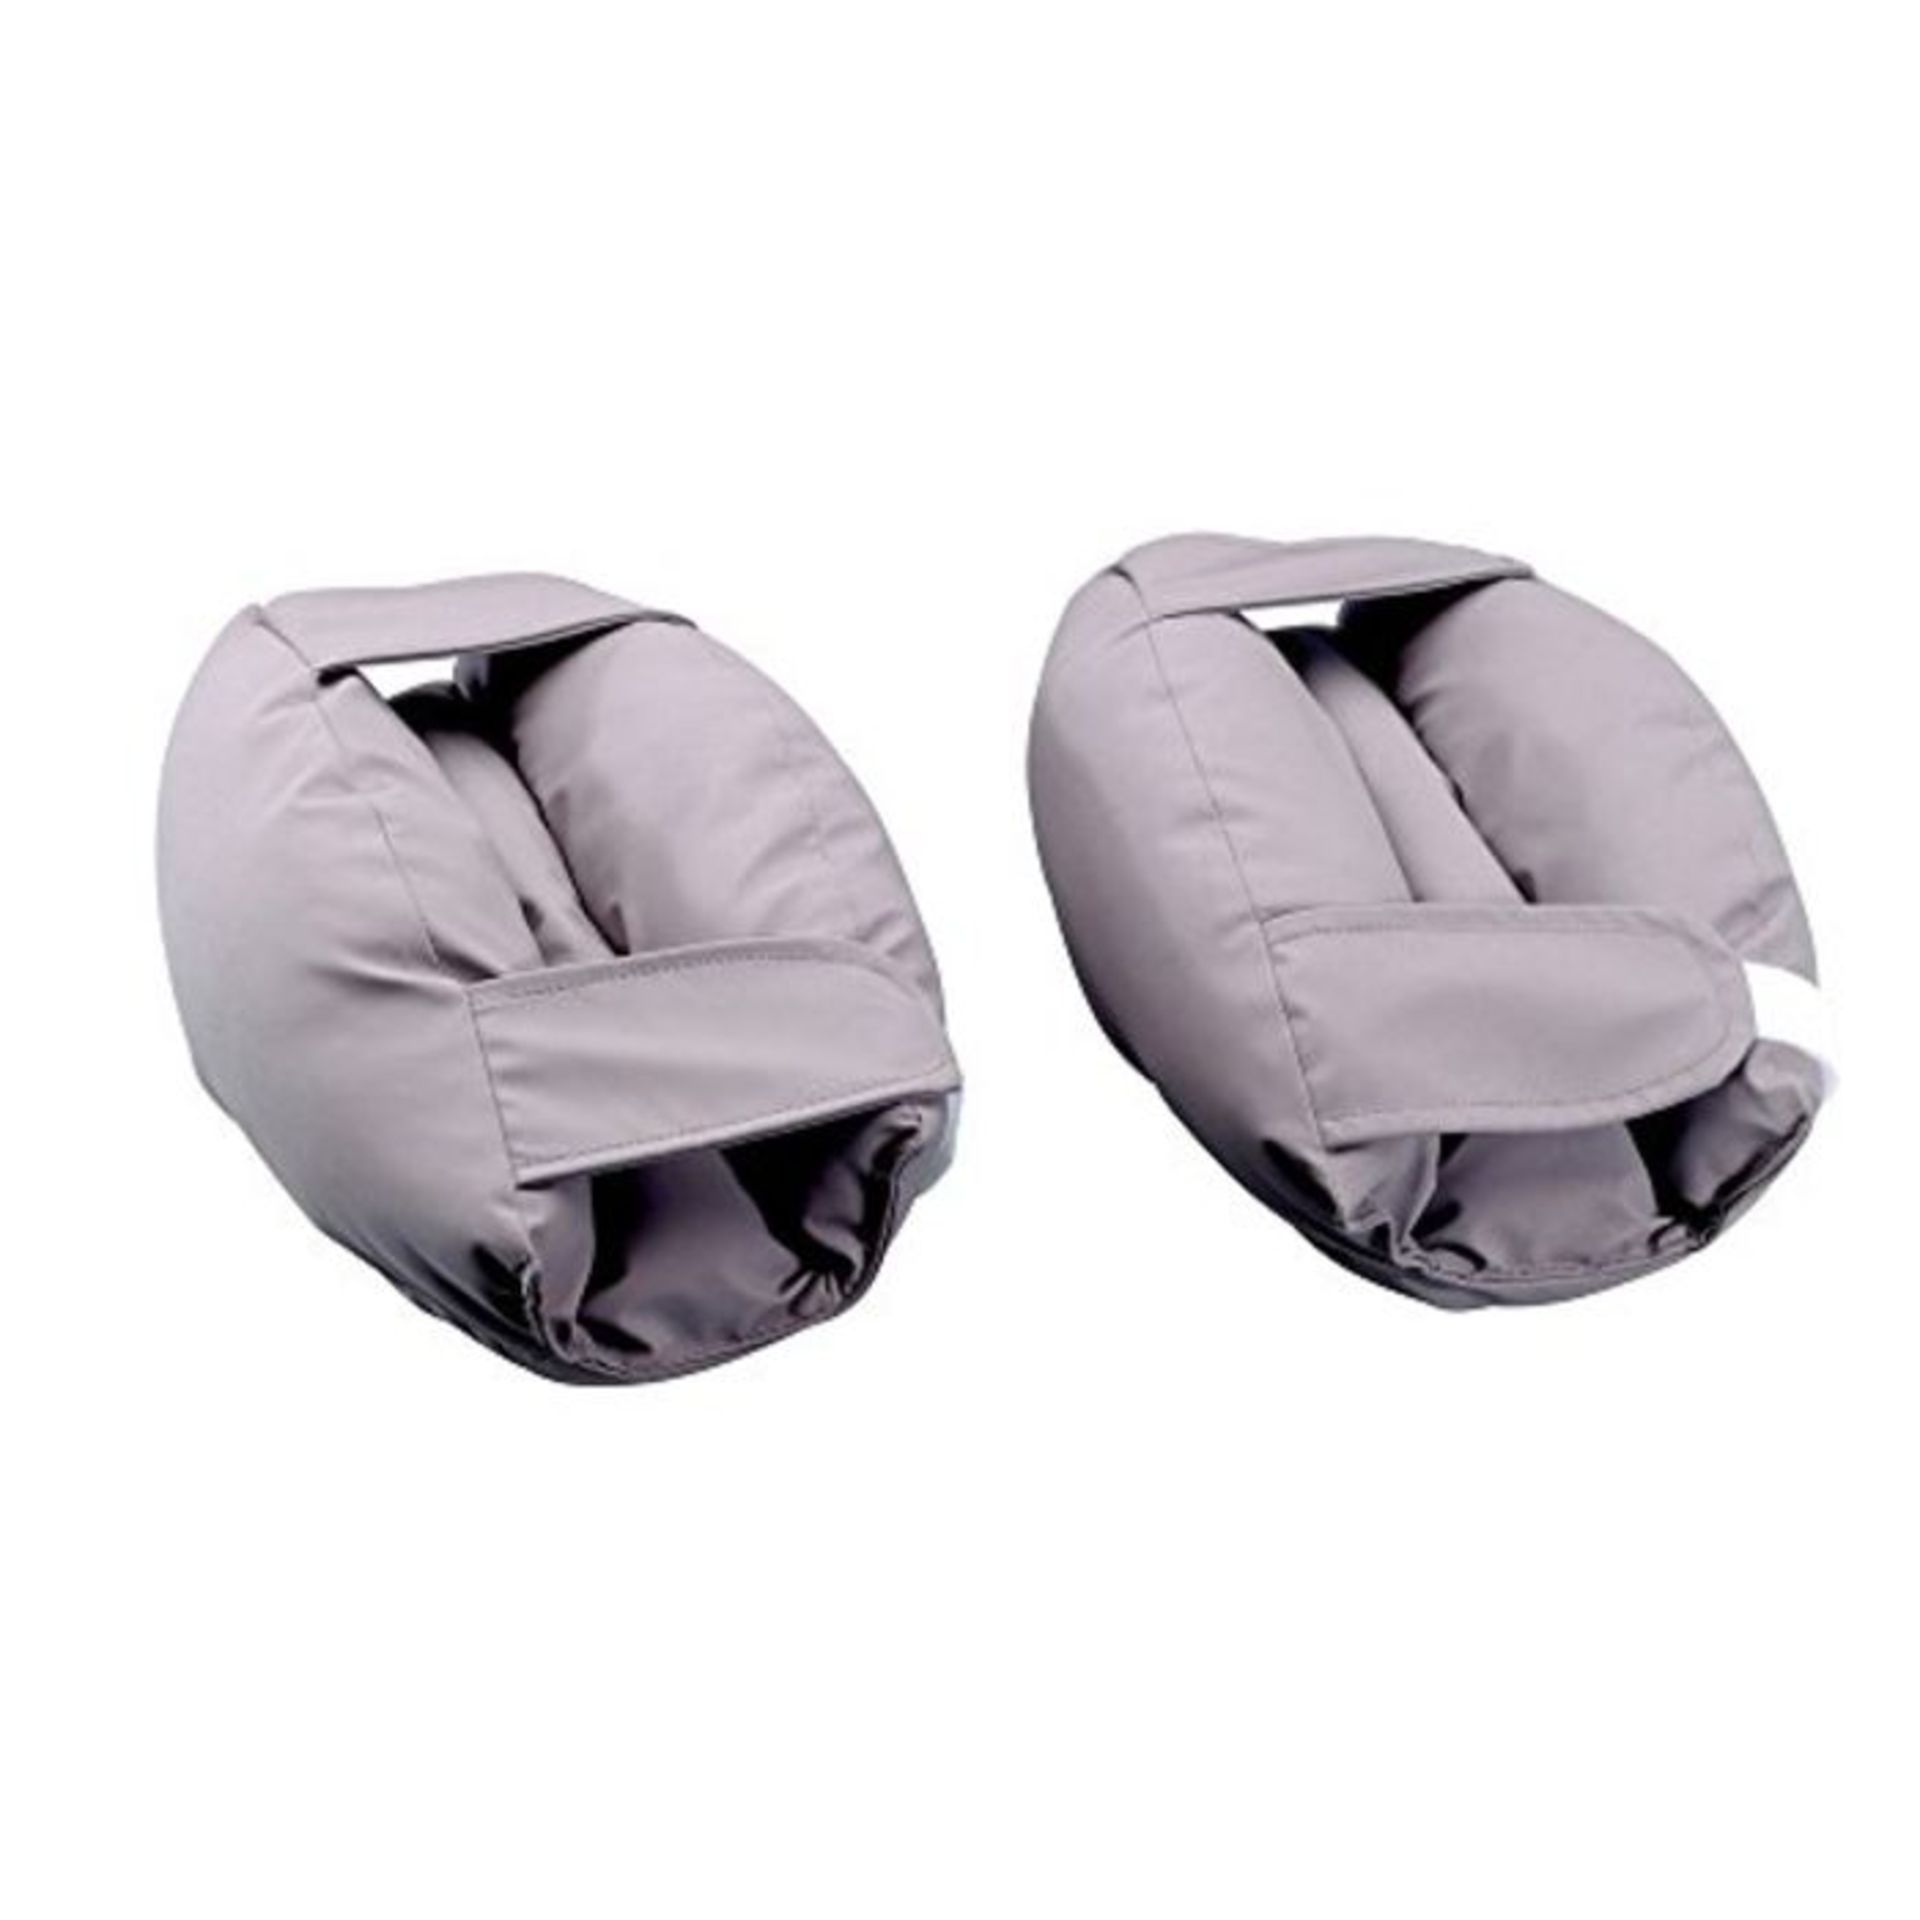 NRS Healthcare Pair of Elbow Pads for Pressure Care